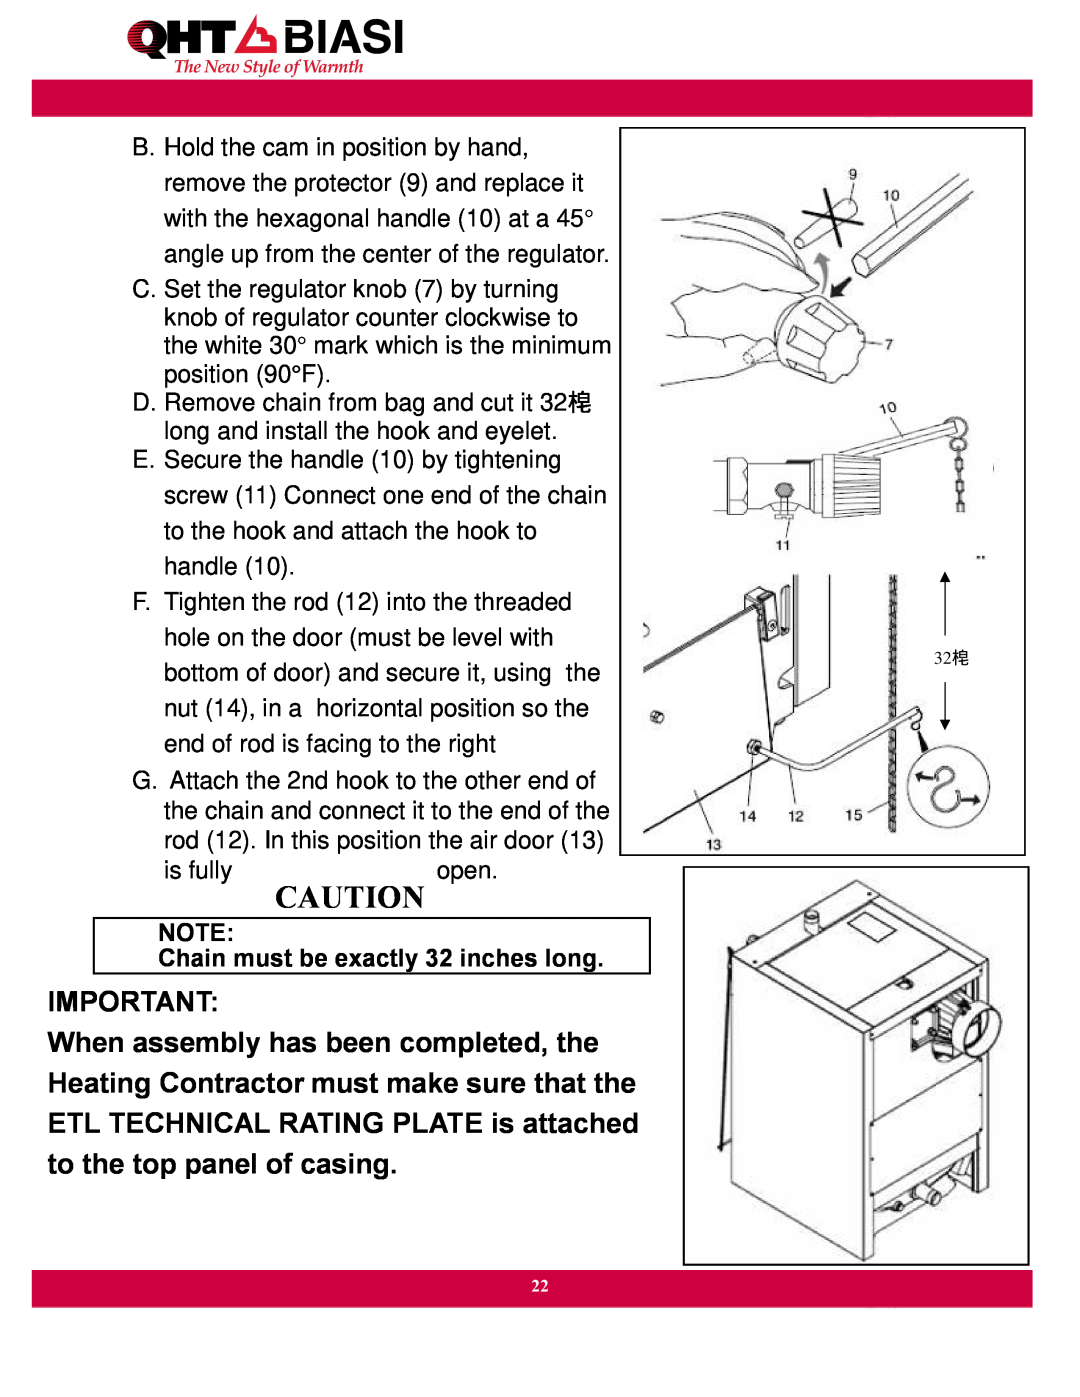 QHT Boiler manual Chain must be exactly 32 inches long 